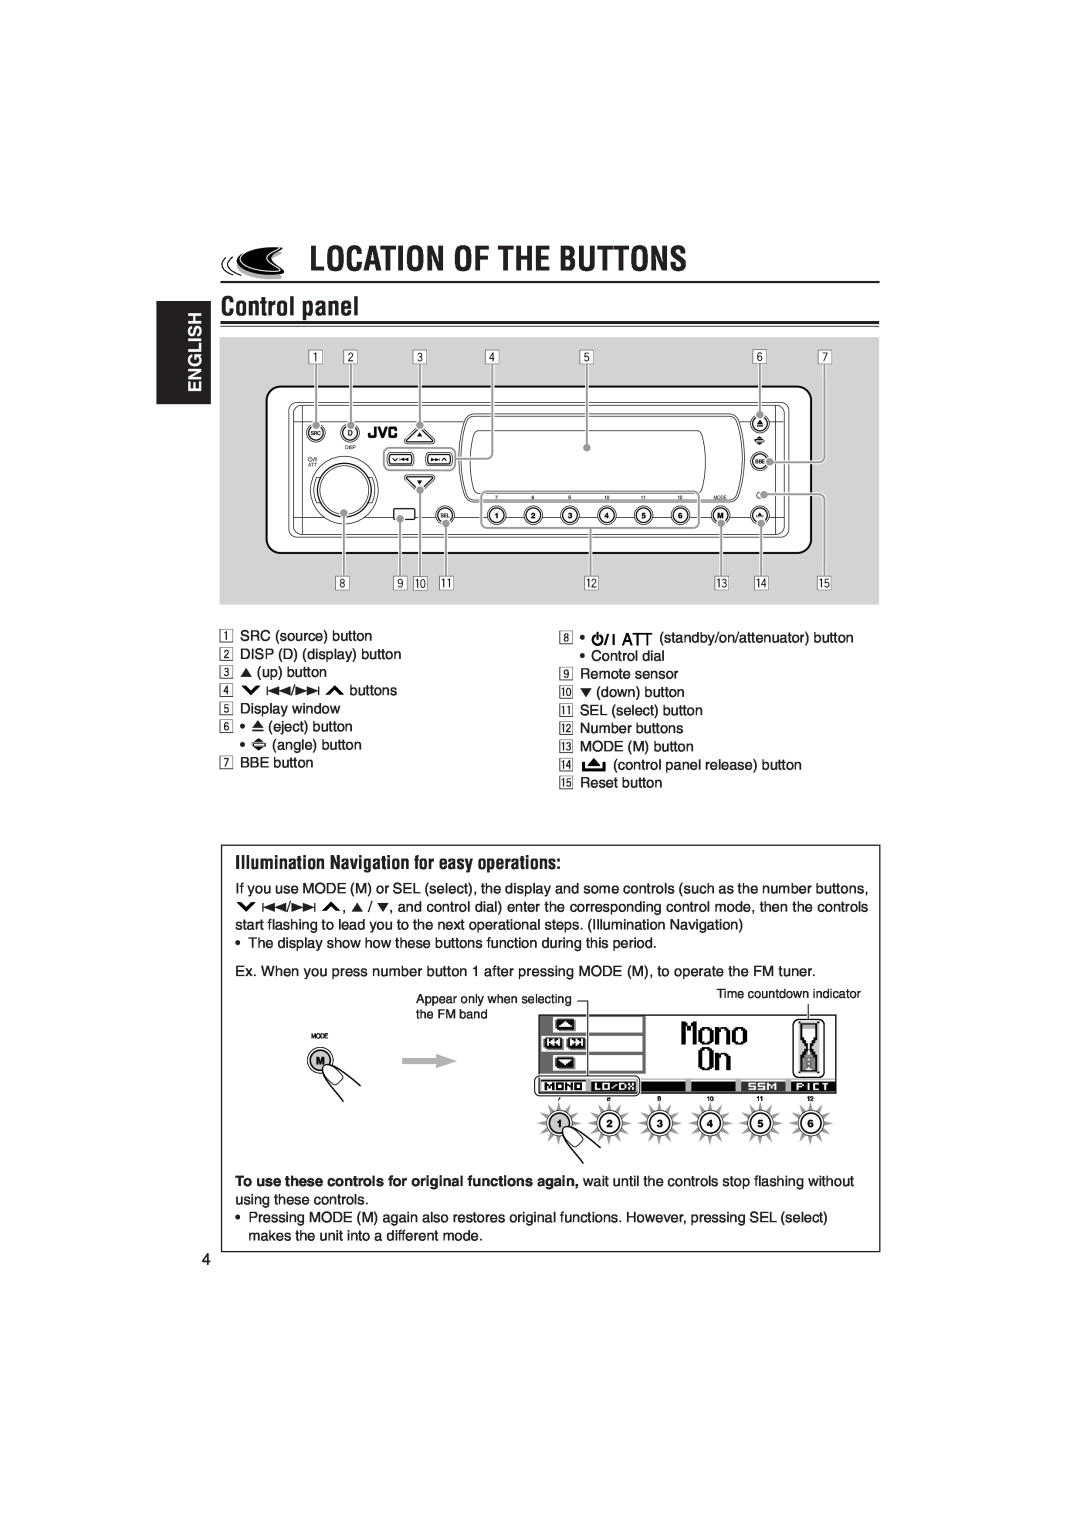 JVC KD-SH9105 manual Location Of The Buttons, Control panel, English, Illumination Navigation for easy operations 